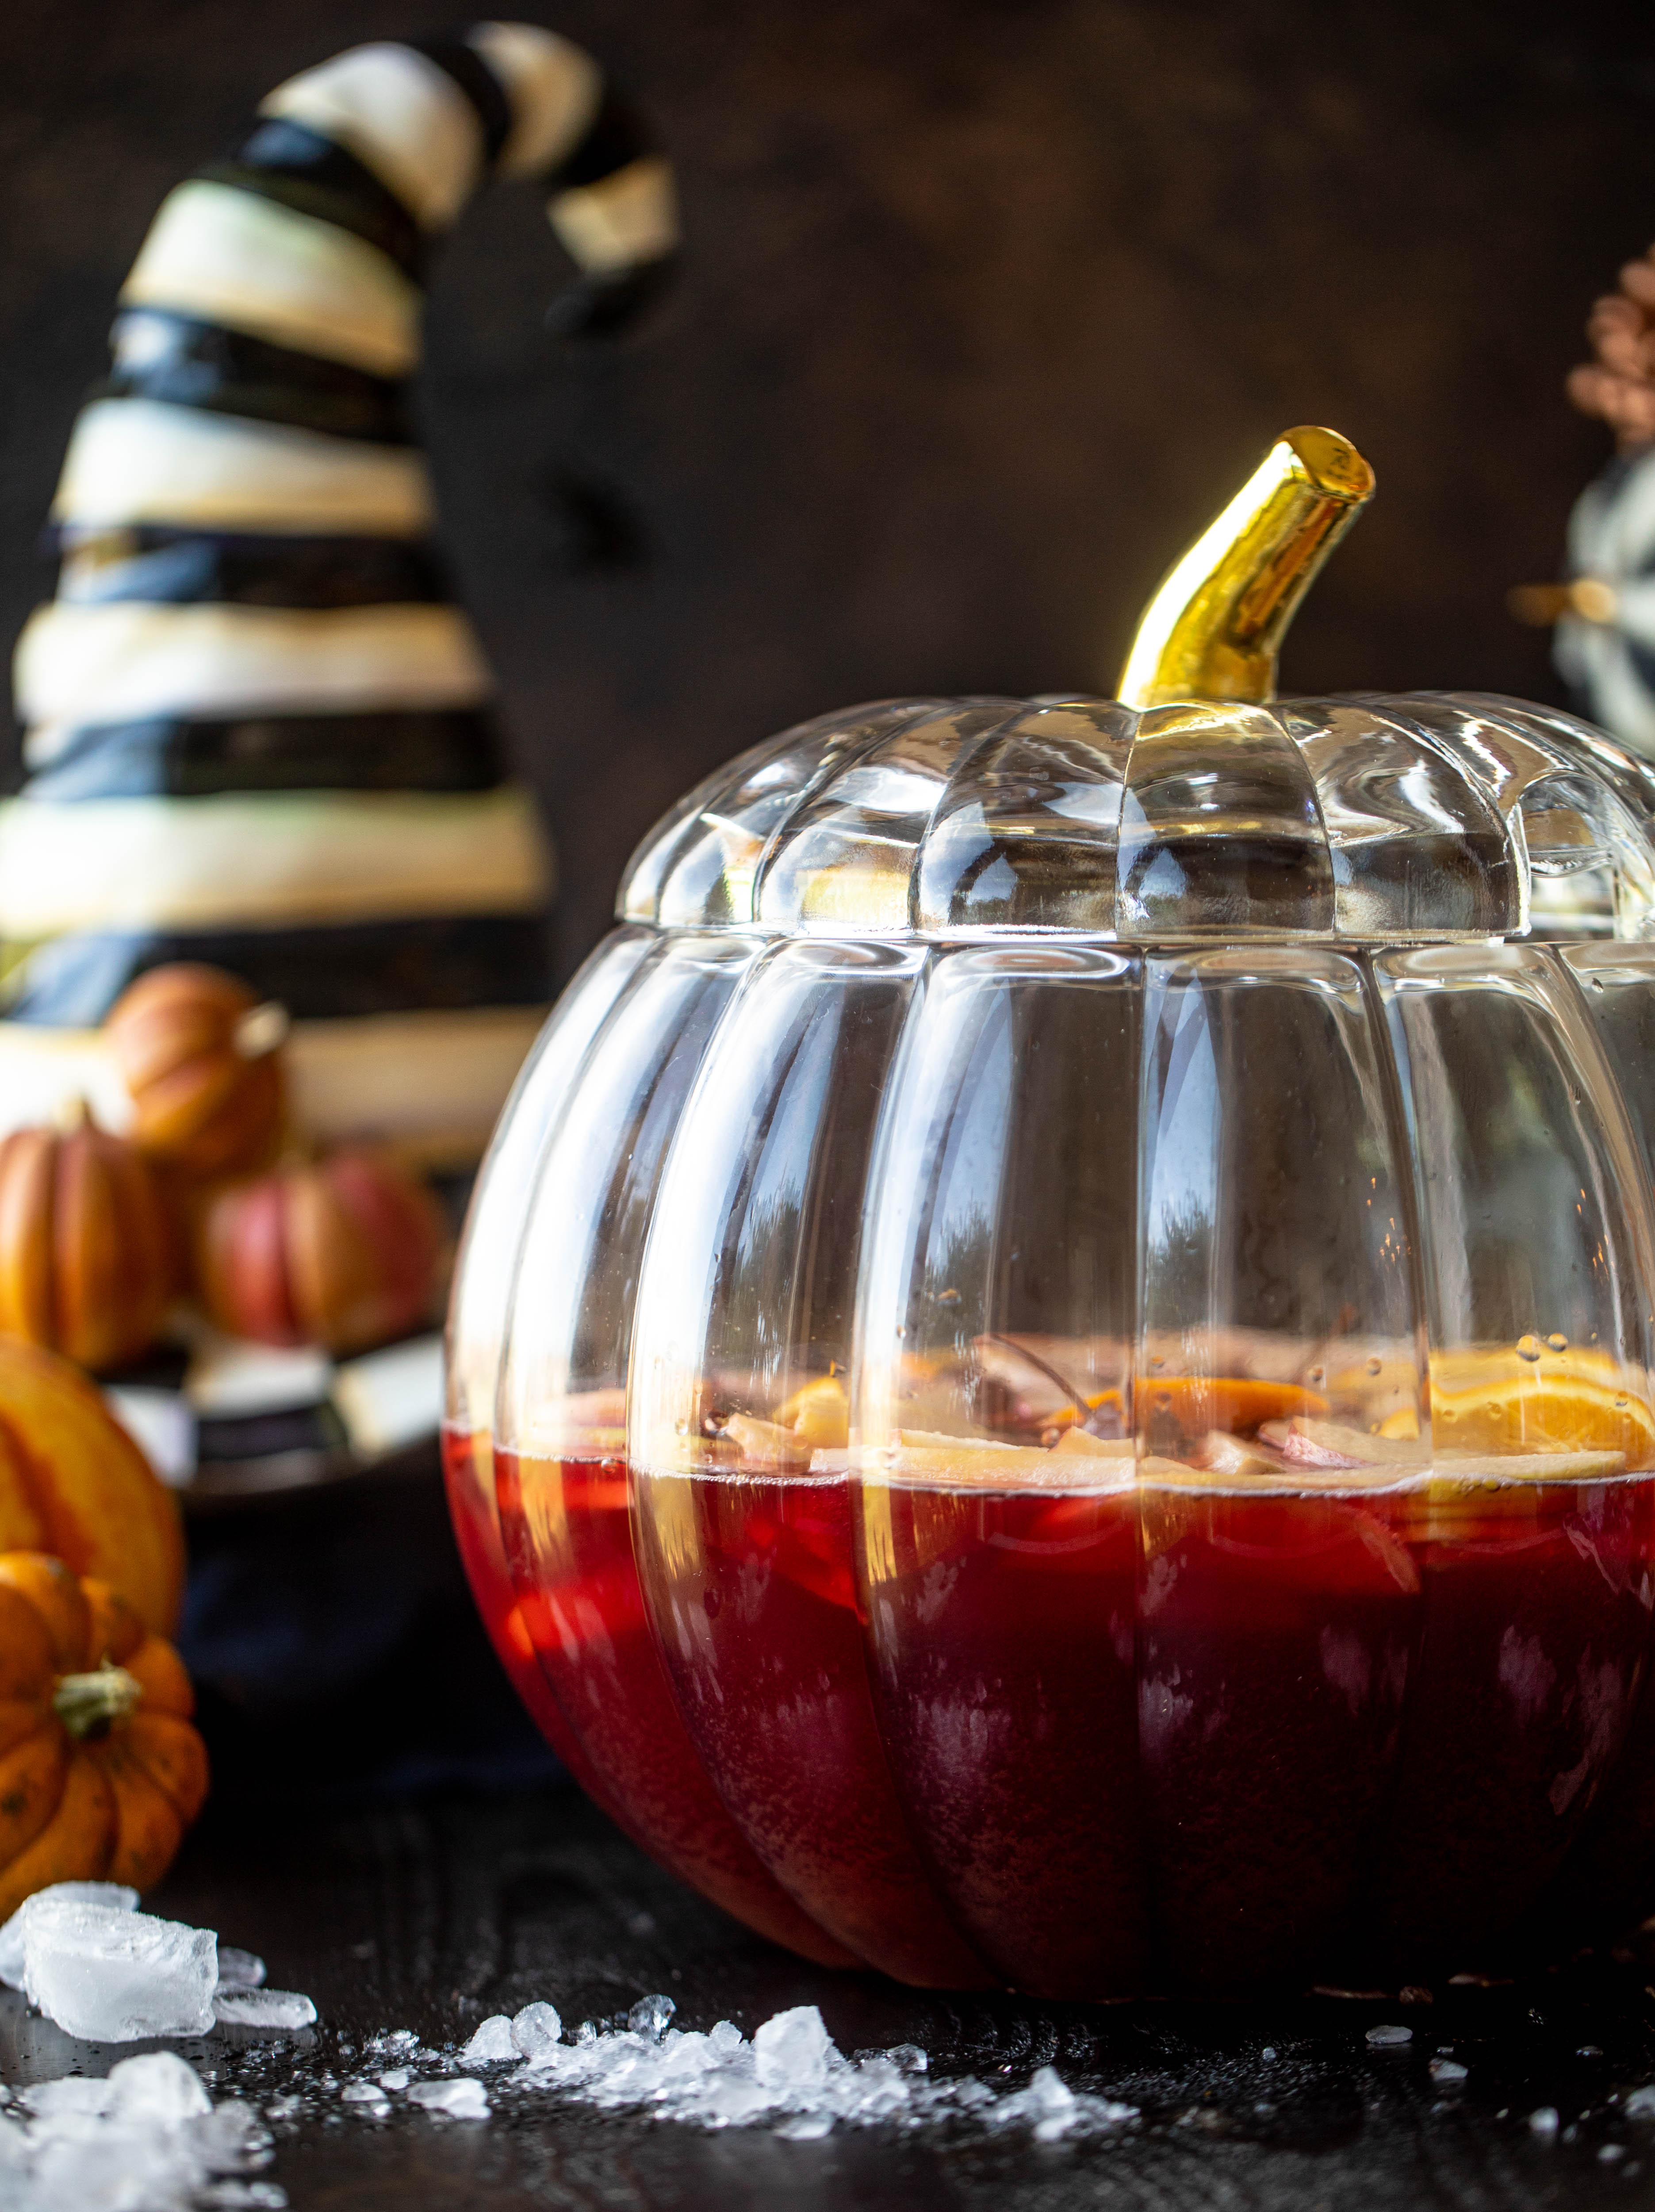 A fun Halloween punch that everyone can enjoy! Hocus pocus punch is full of cider, orange and cranberry and tastes delicious!